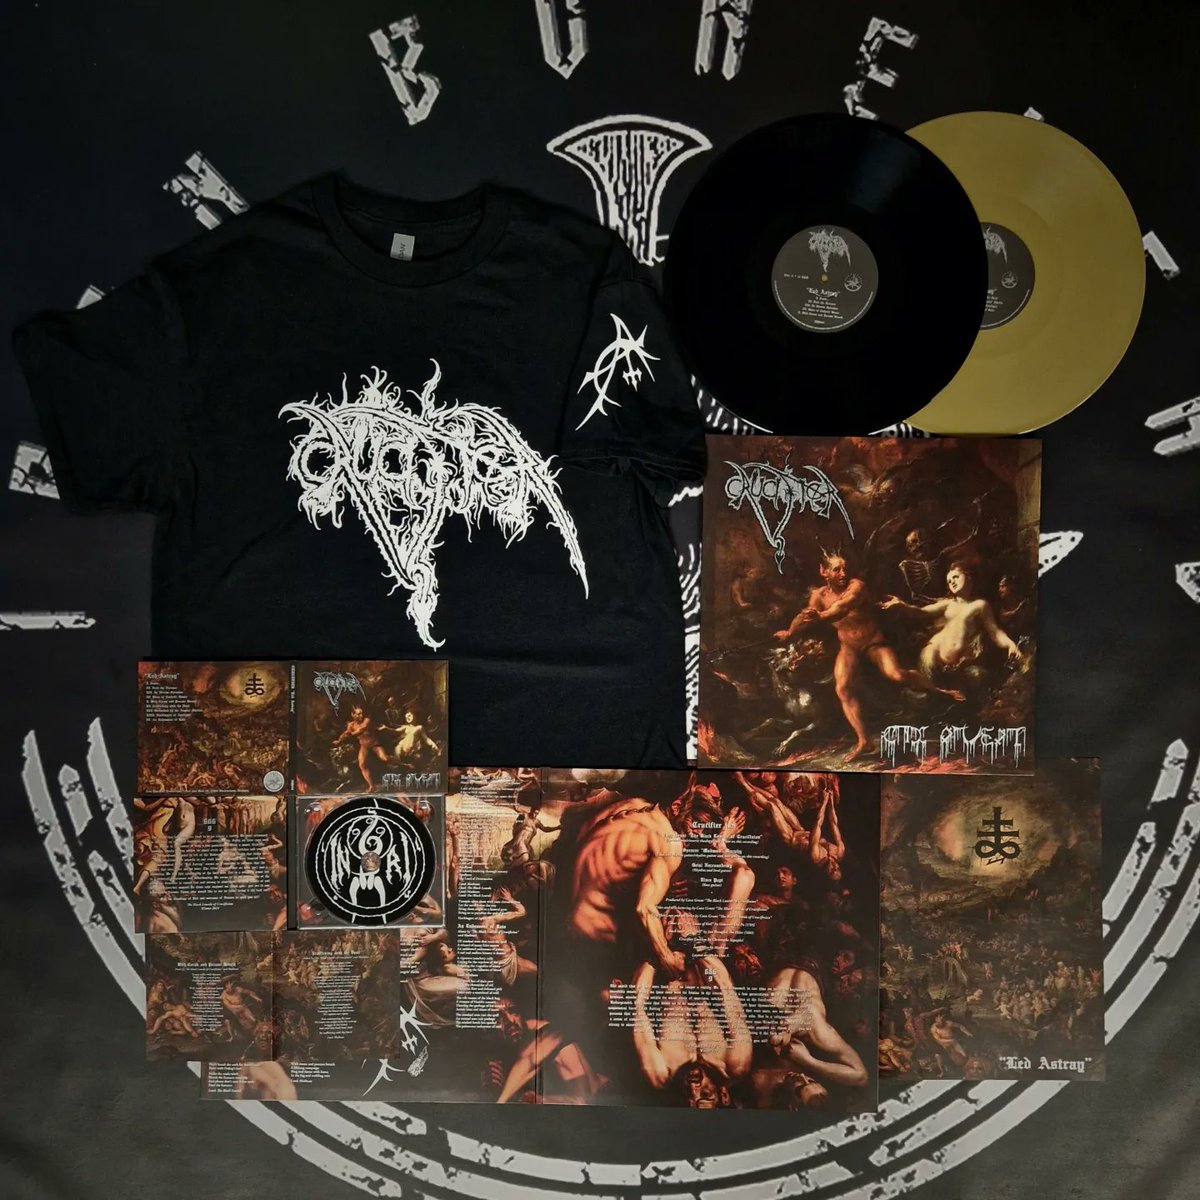 OUT NOW! CRUCIFIER (USA) 'Led Astray' LP/CD/T-Shirt